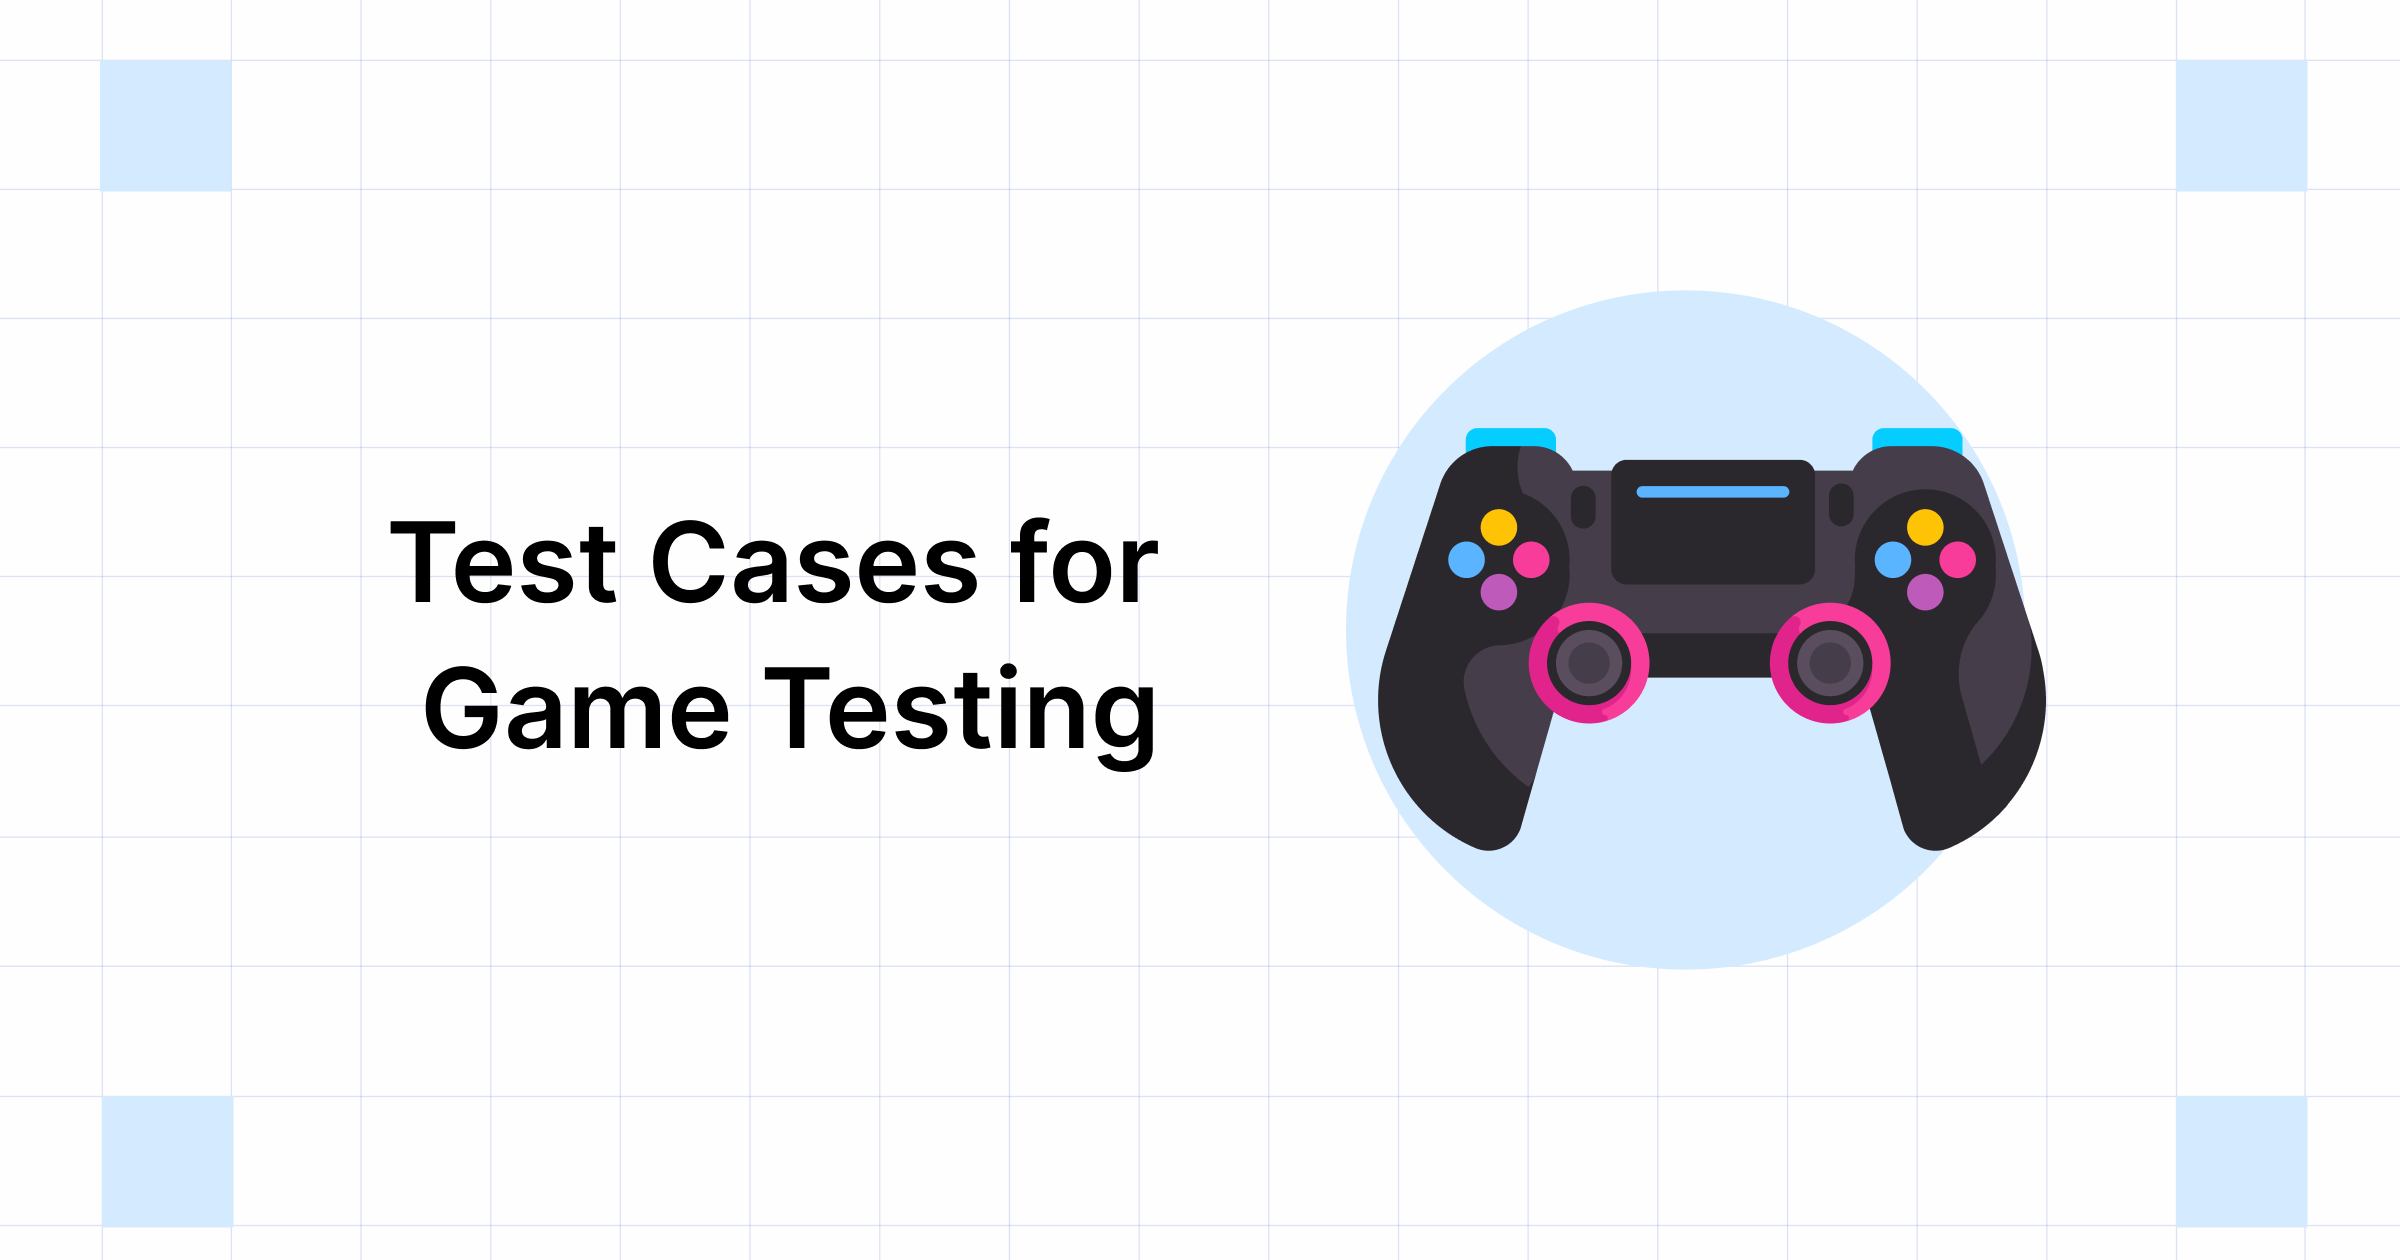 How Do You Write Test Cases for Game Testing